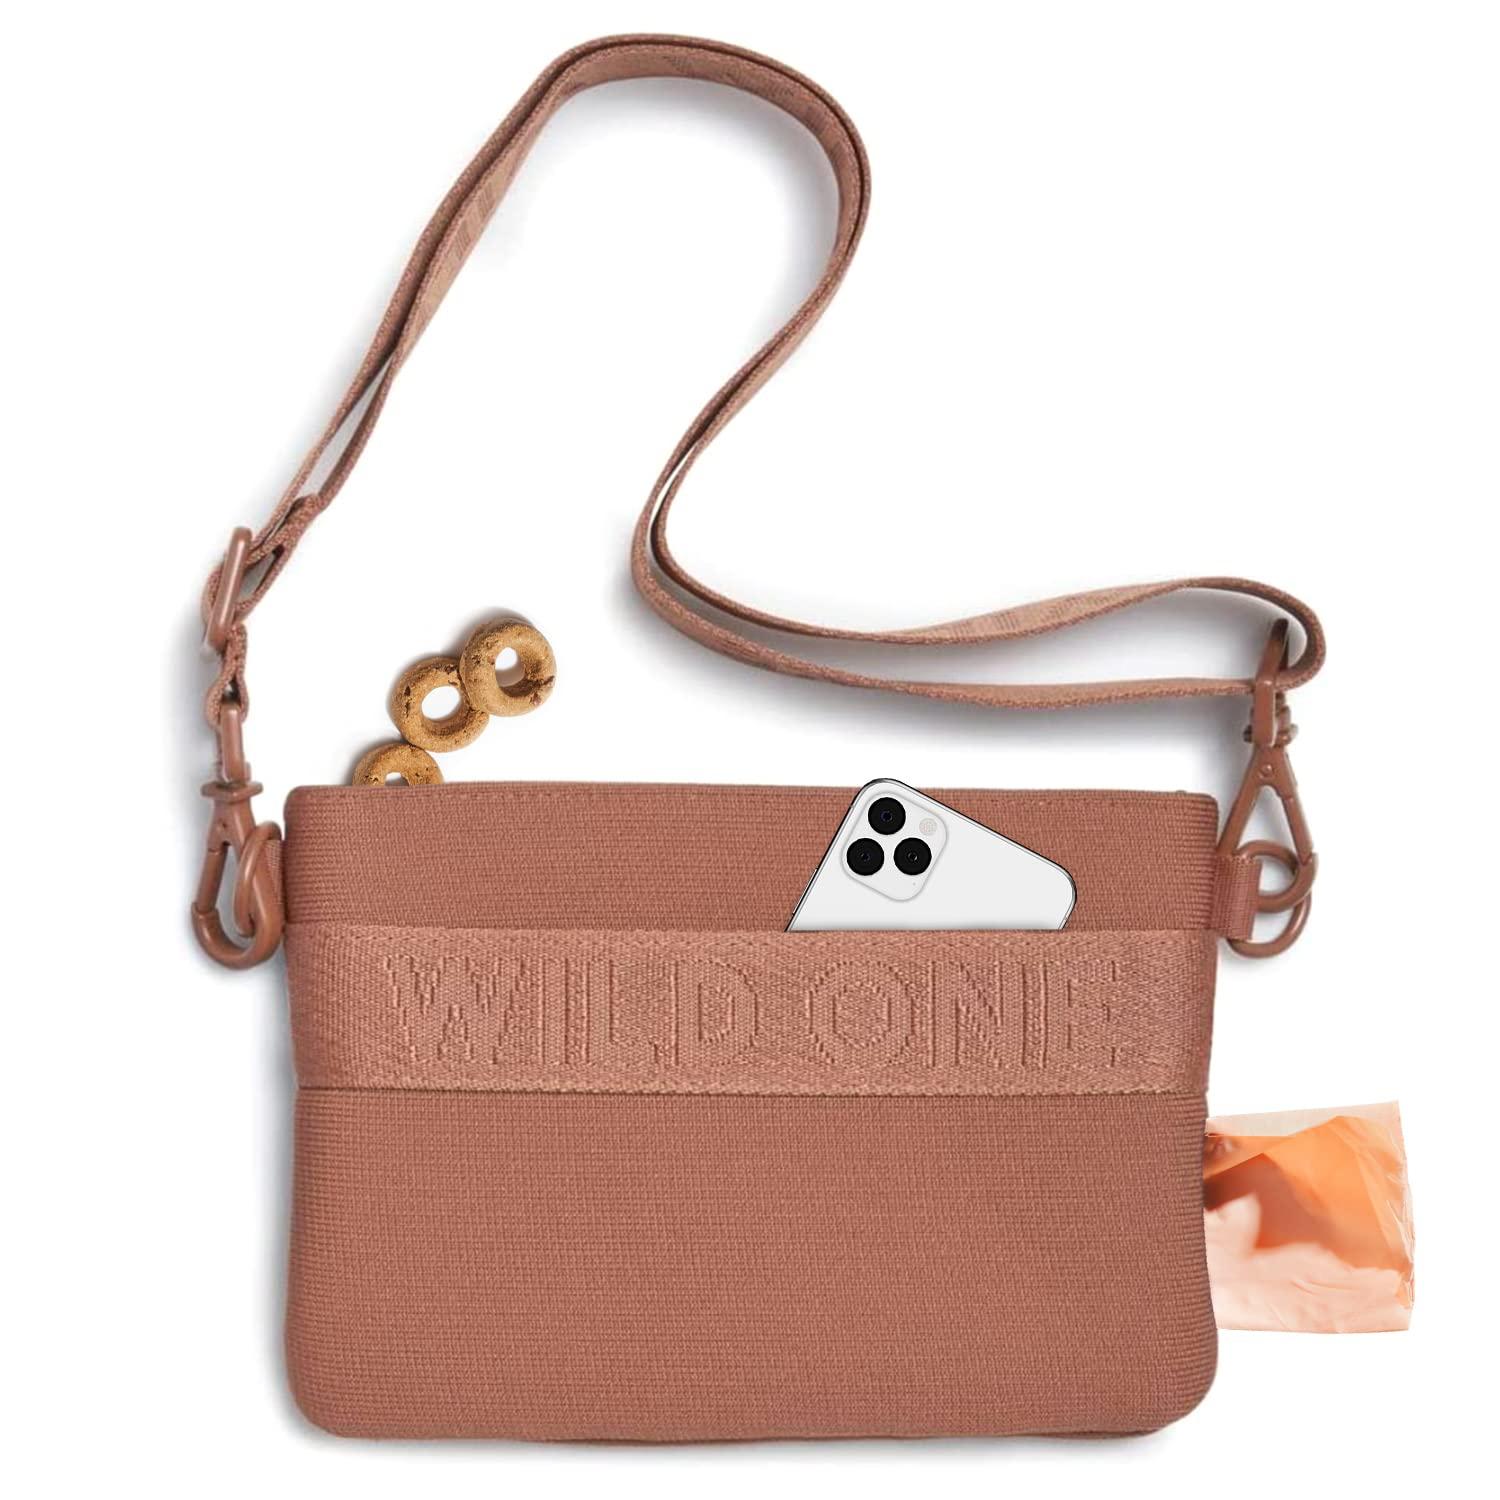 Wild One, Coco Treat Pouch, Fanny Pack, Cross-Body Bag, wear Two Ways, Made from Recycled Knit, Poop Bag Dispenser, The Perfect Accessory for Dog Training, Brown